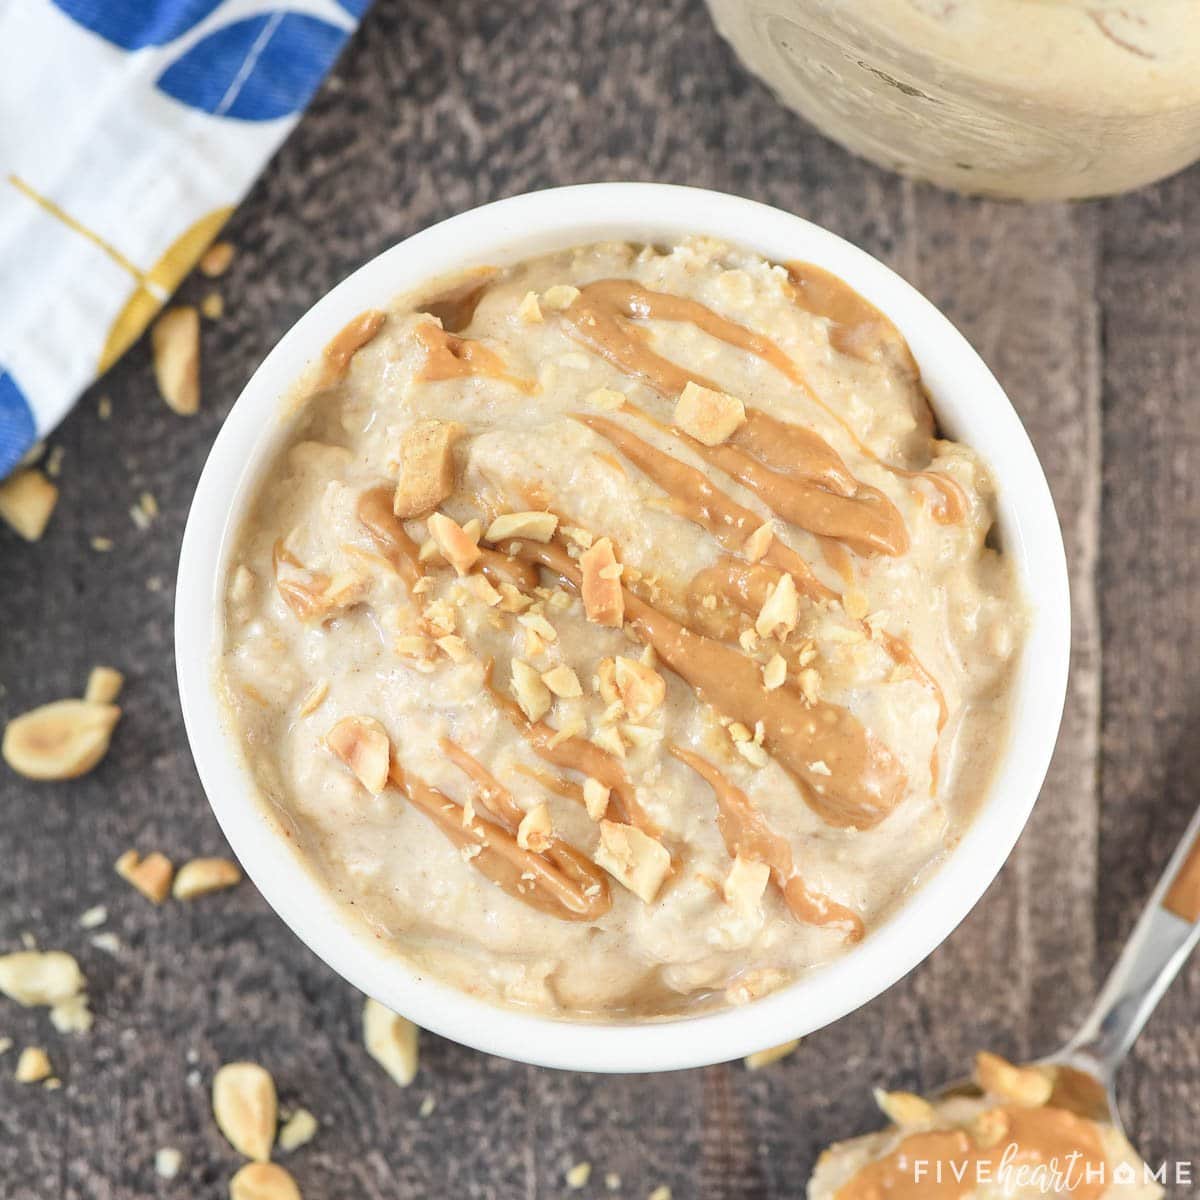 https://www.fivehearthome.com/wp-content/uploads/2023/06/Peanut-Butter-Overnight-Oats-Recipe-by-Five-Heart-Home_1200pxSquare-5.jpg